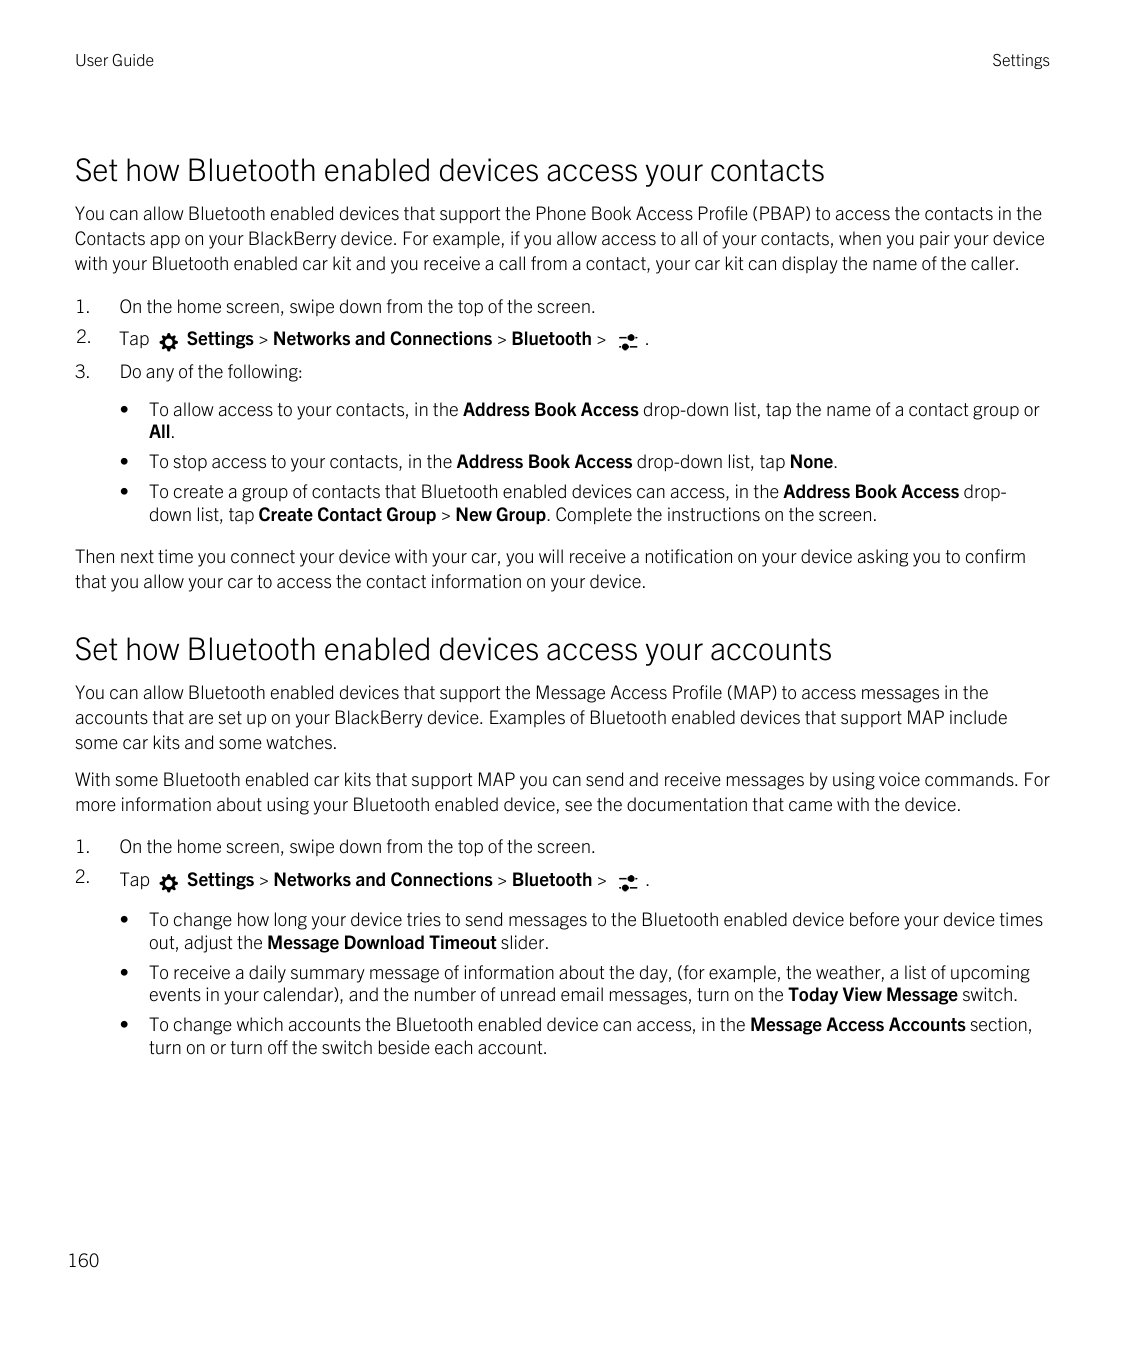 User GuideSettingsSet how Bluetooth enabled devices access your contactsYou can allow Bluetooth enabled devices that support the